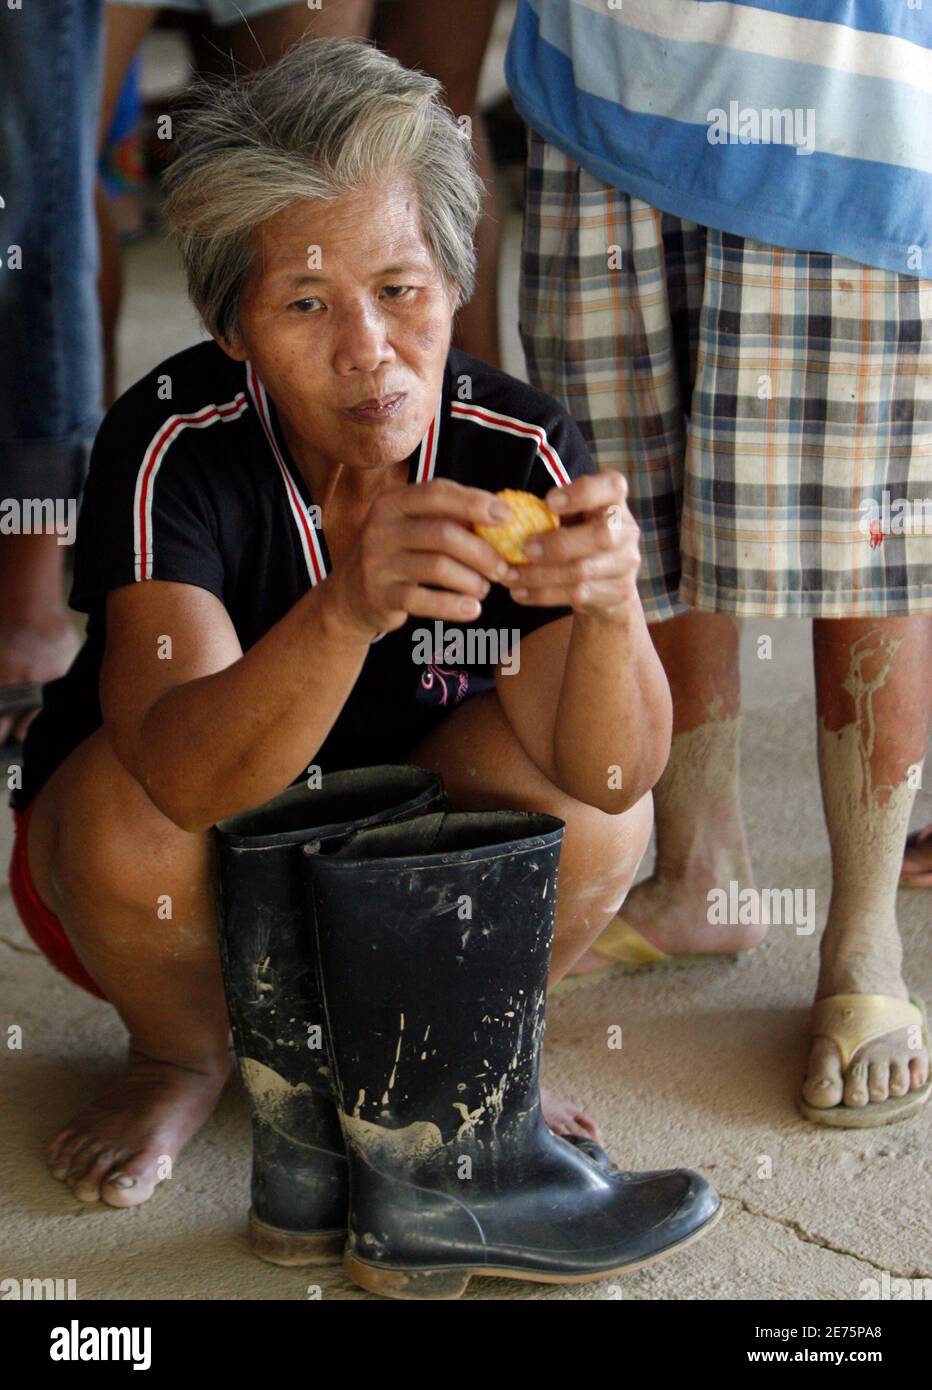 A flood victim eats biscuits while waiting for the distribution of relief supplies from U.S. Marines, 31st Marine Expeditionary Unit in flood-hit town of Rosales, Pangasinan in the northern Philippines October 11, 2009. REUTERS/Erik de Castro    (PHILIPPINES ENVIRONMENT DISASTER) Stock Photo